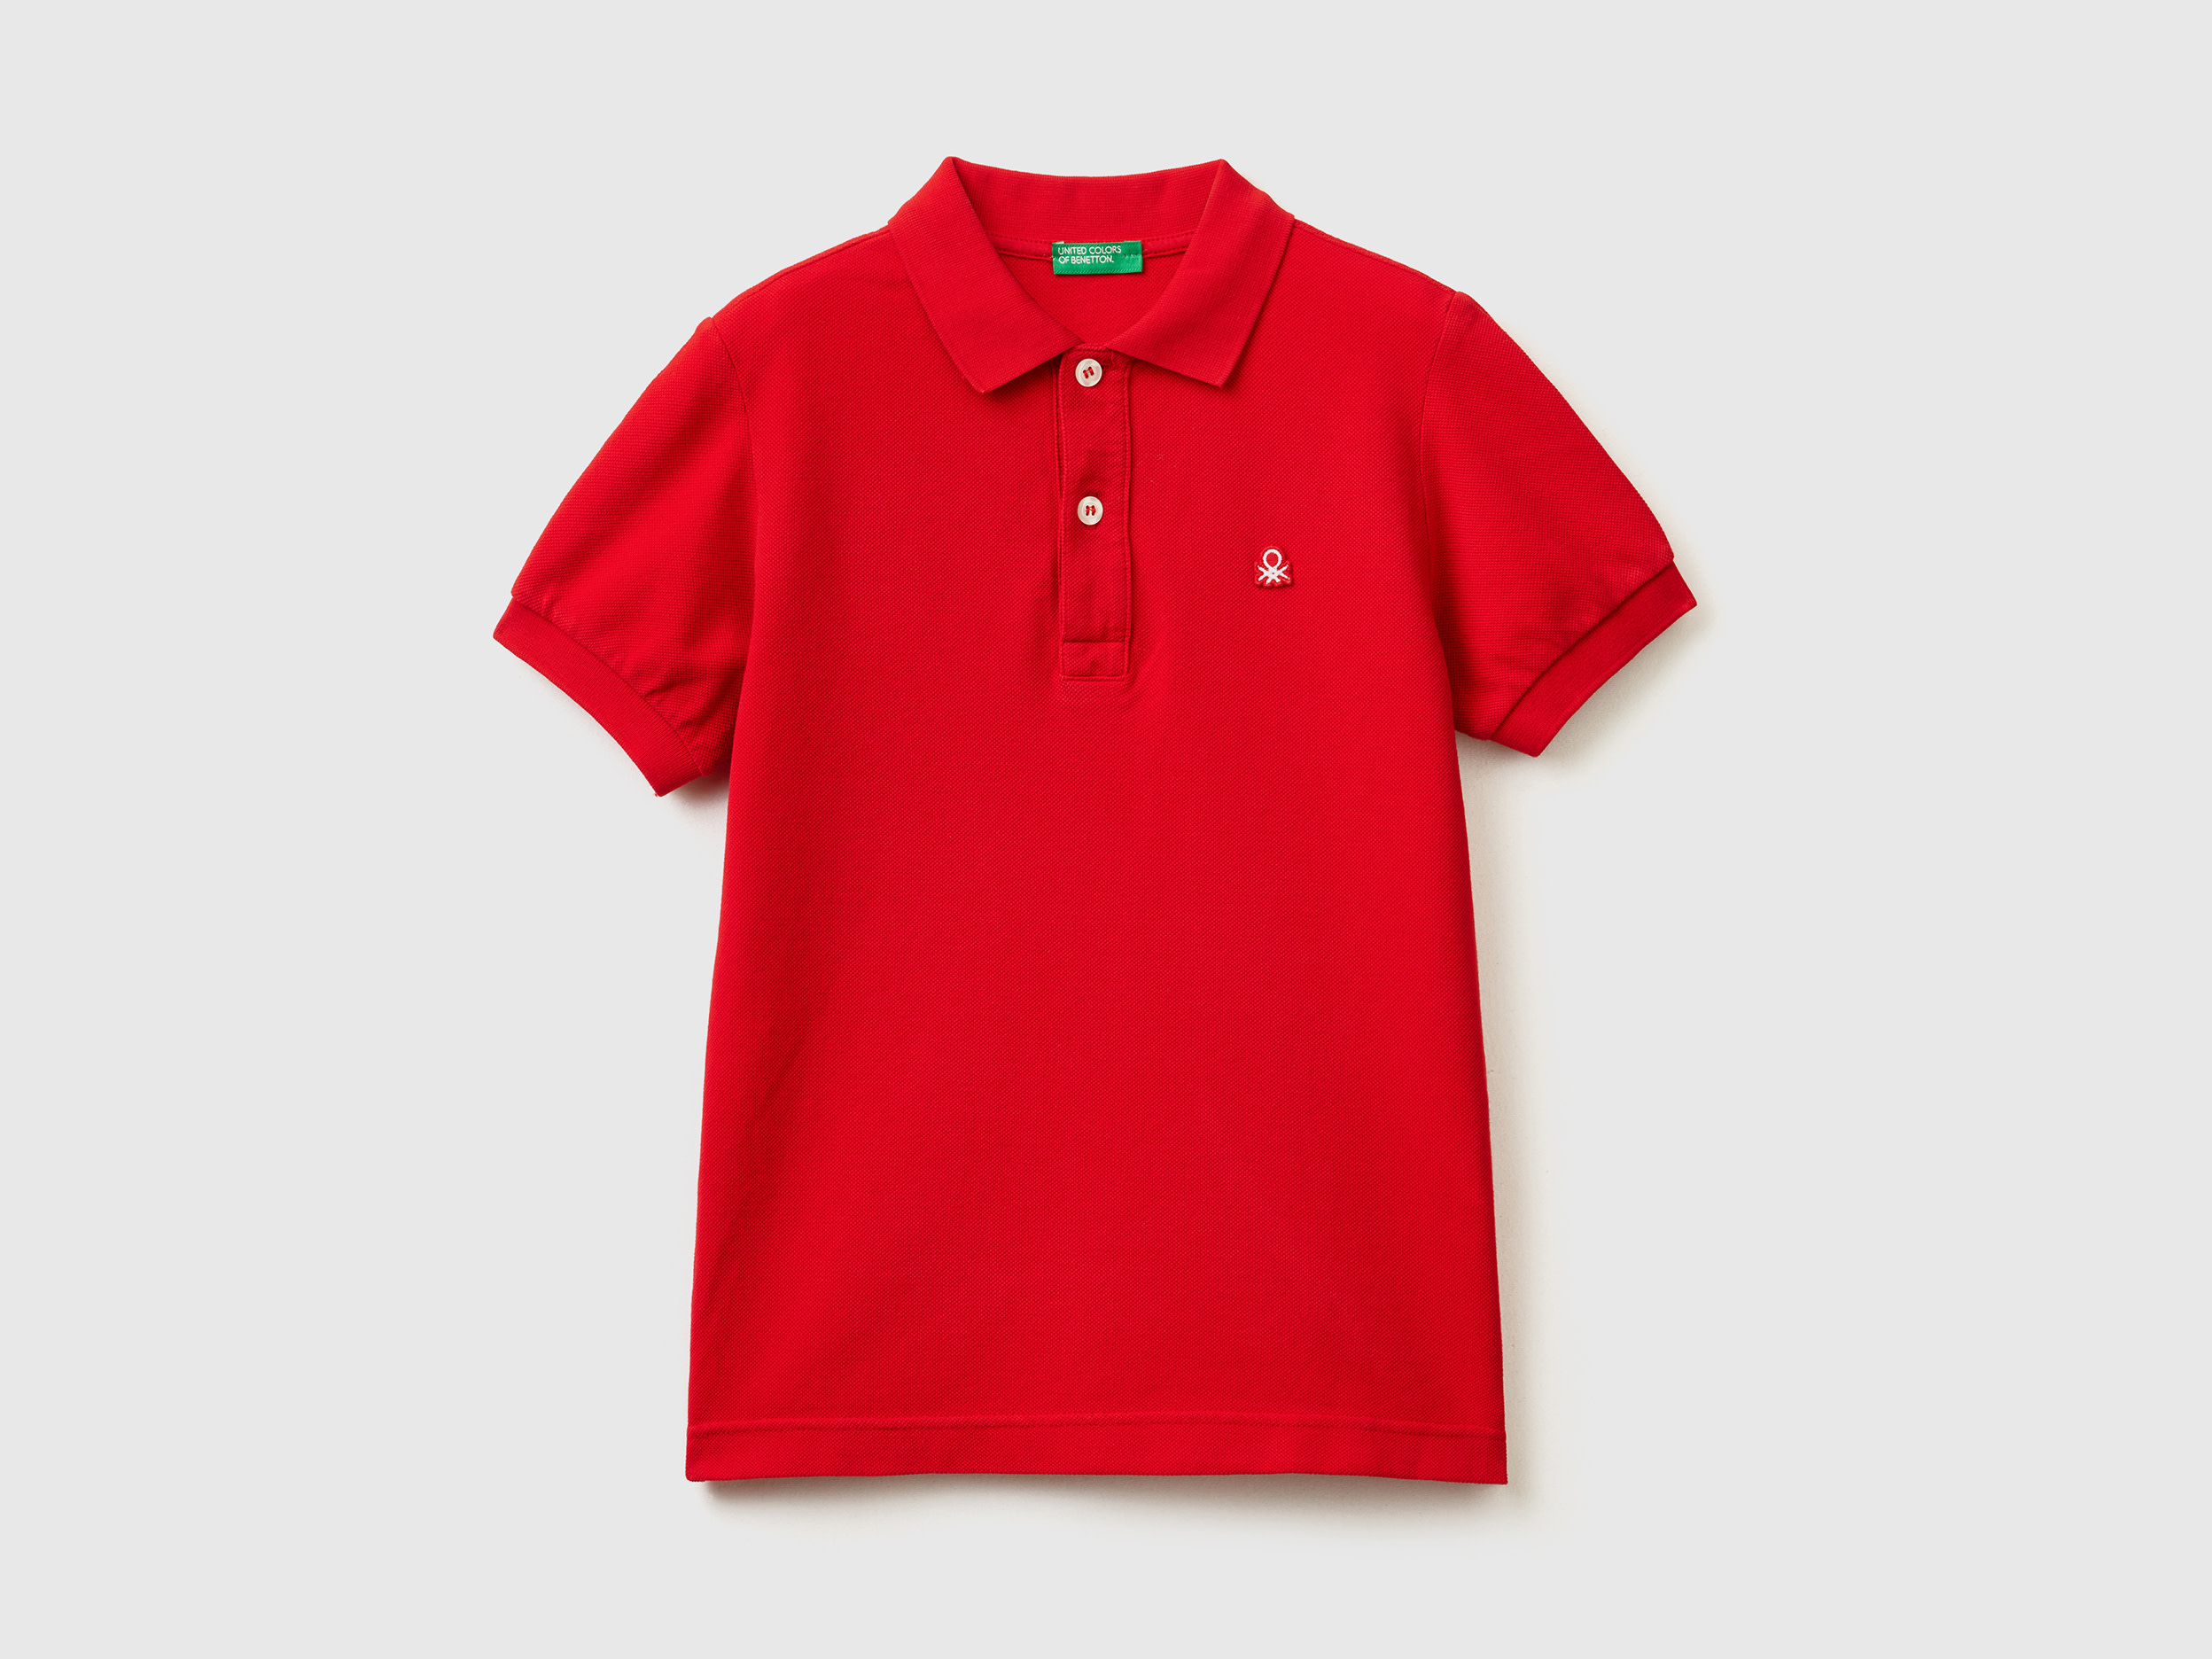 Image of Benetton, Slim Fit Polo In 100% Organic Cotton, size 2XL, Red, Kids